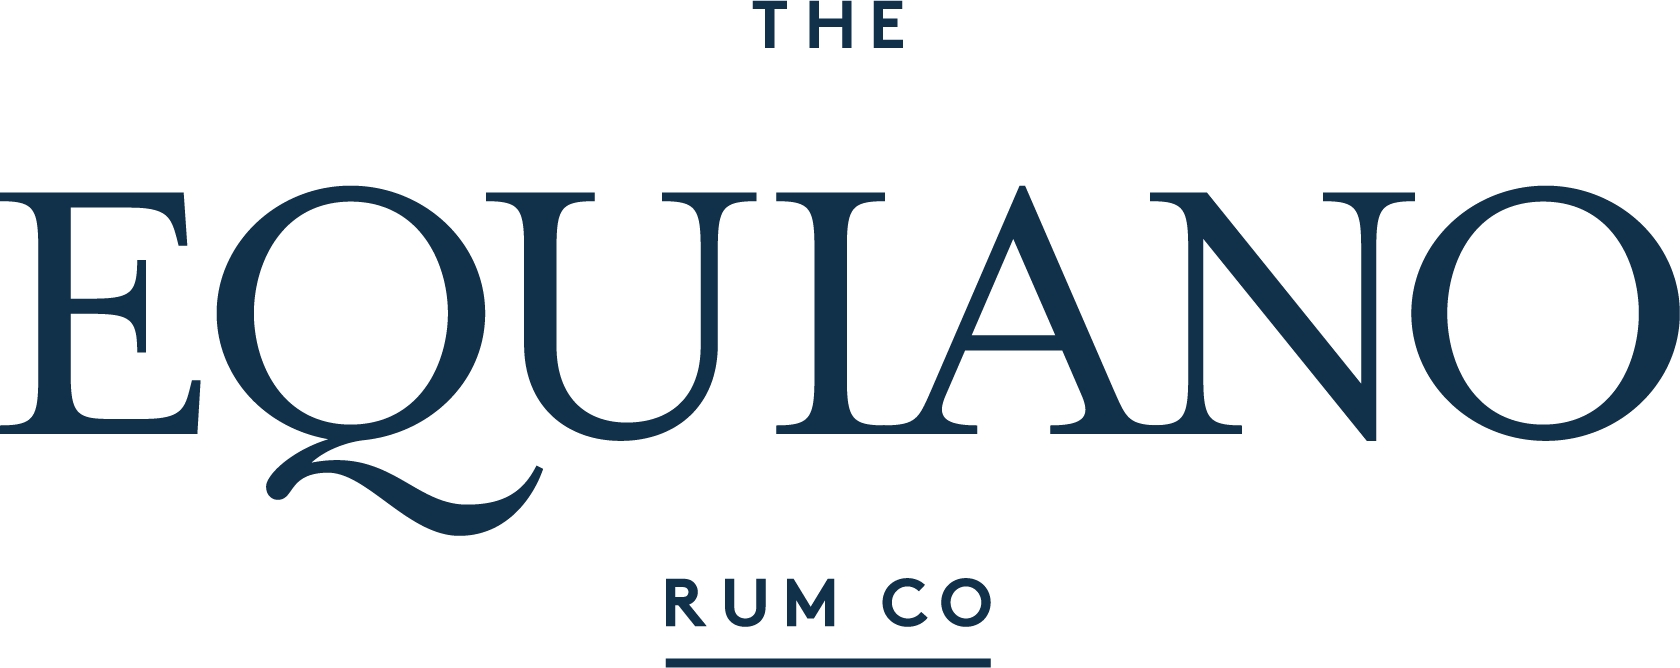 The Equiano Rum Co